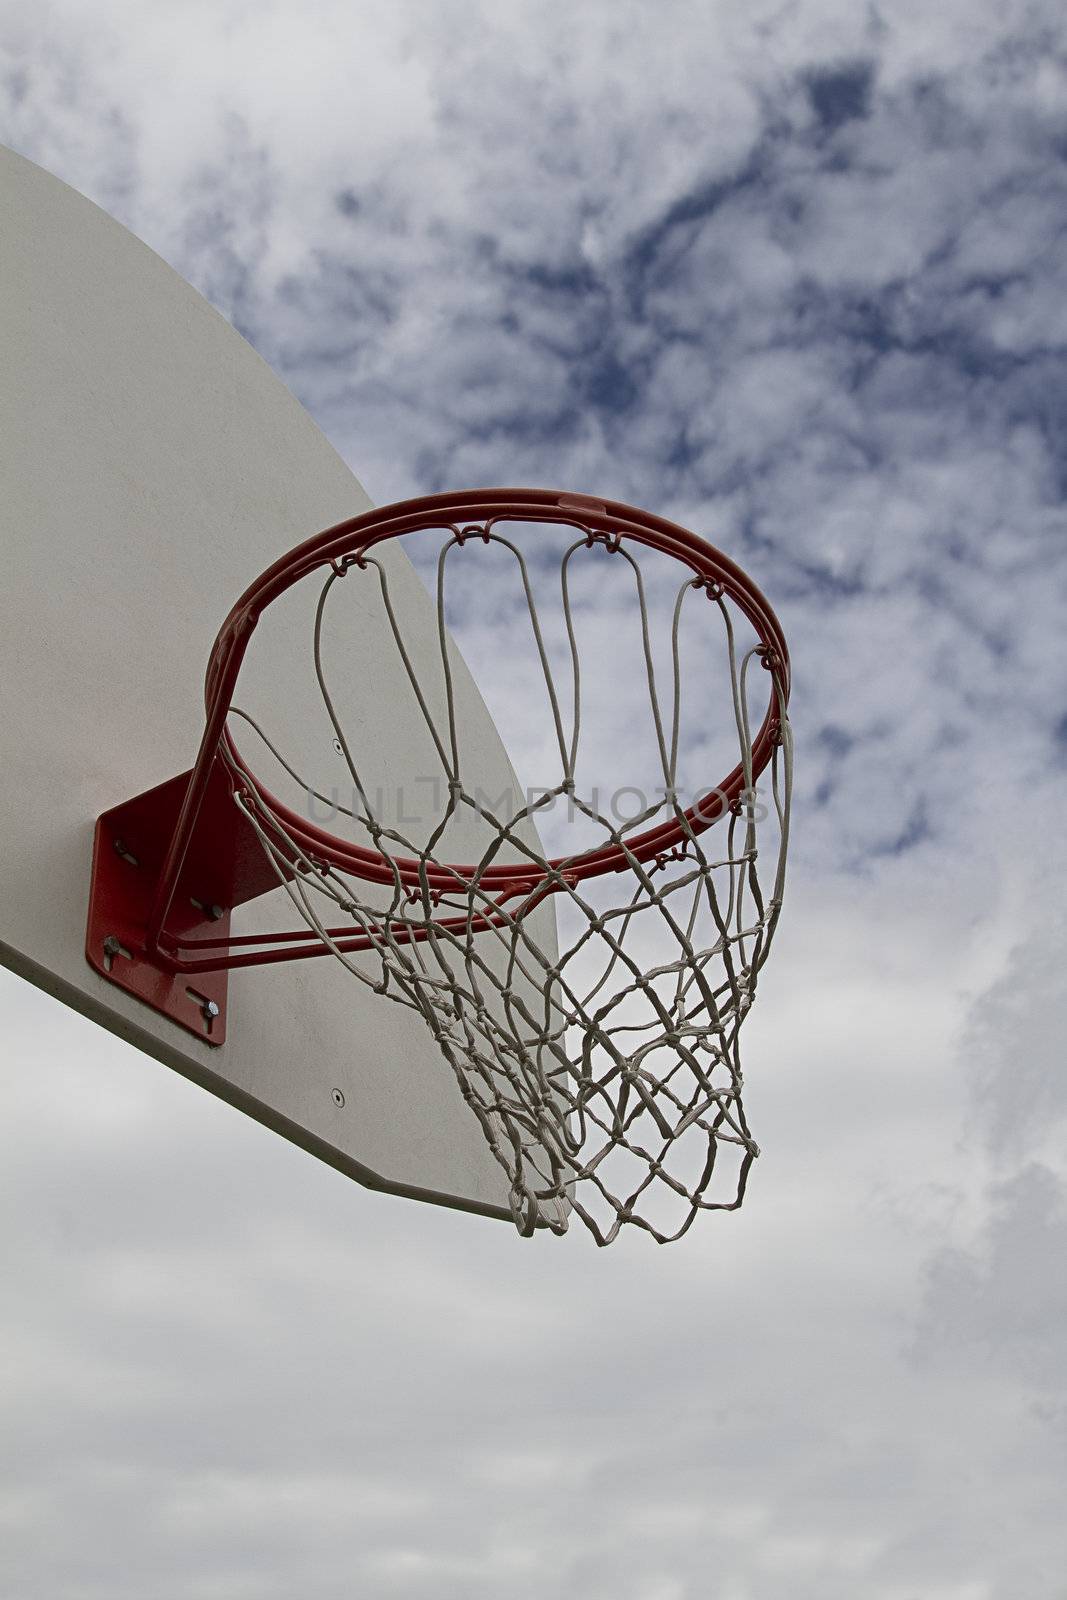 Close up shoot of a basketball hoop against a clouded blue sky